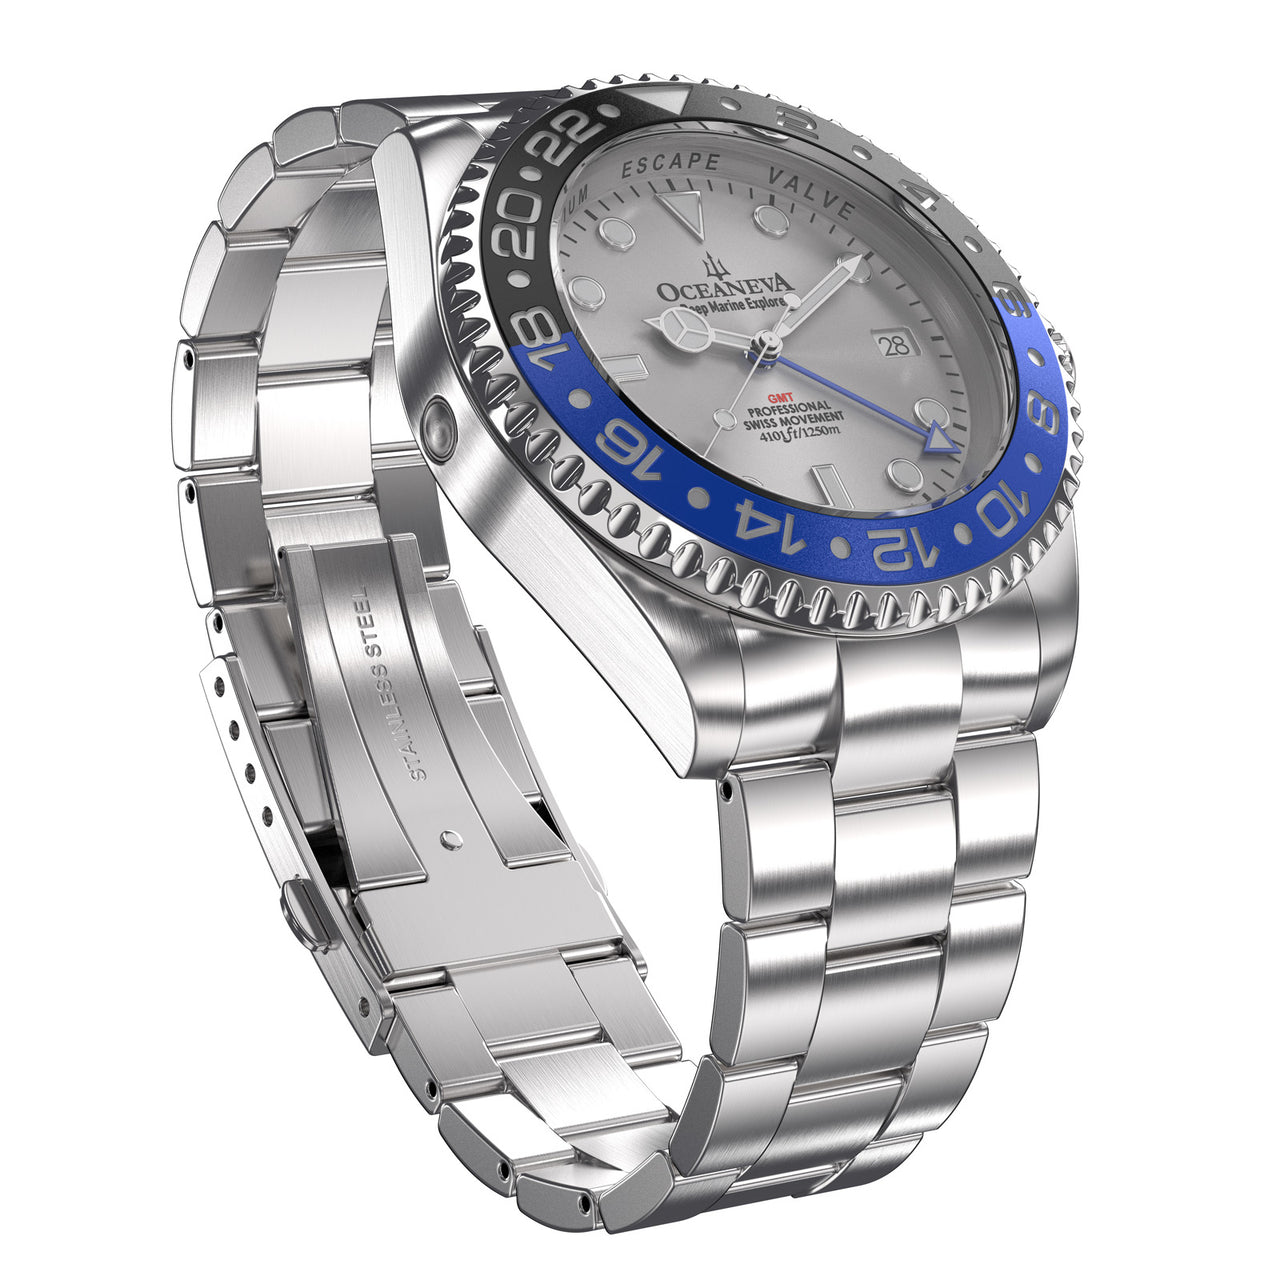 Oceaneva 1250M GMT Dive Watch Silver Blue And Black Front Picture Slight Right Slant View